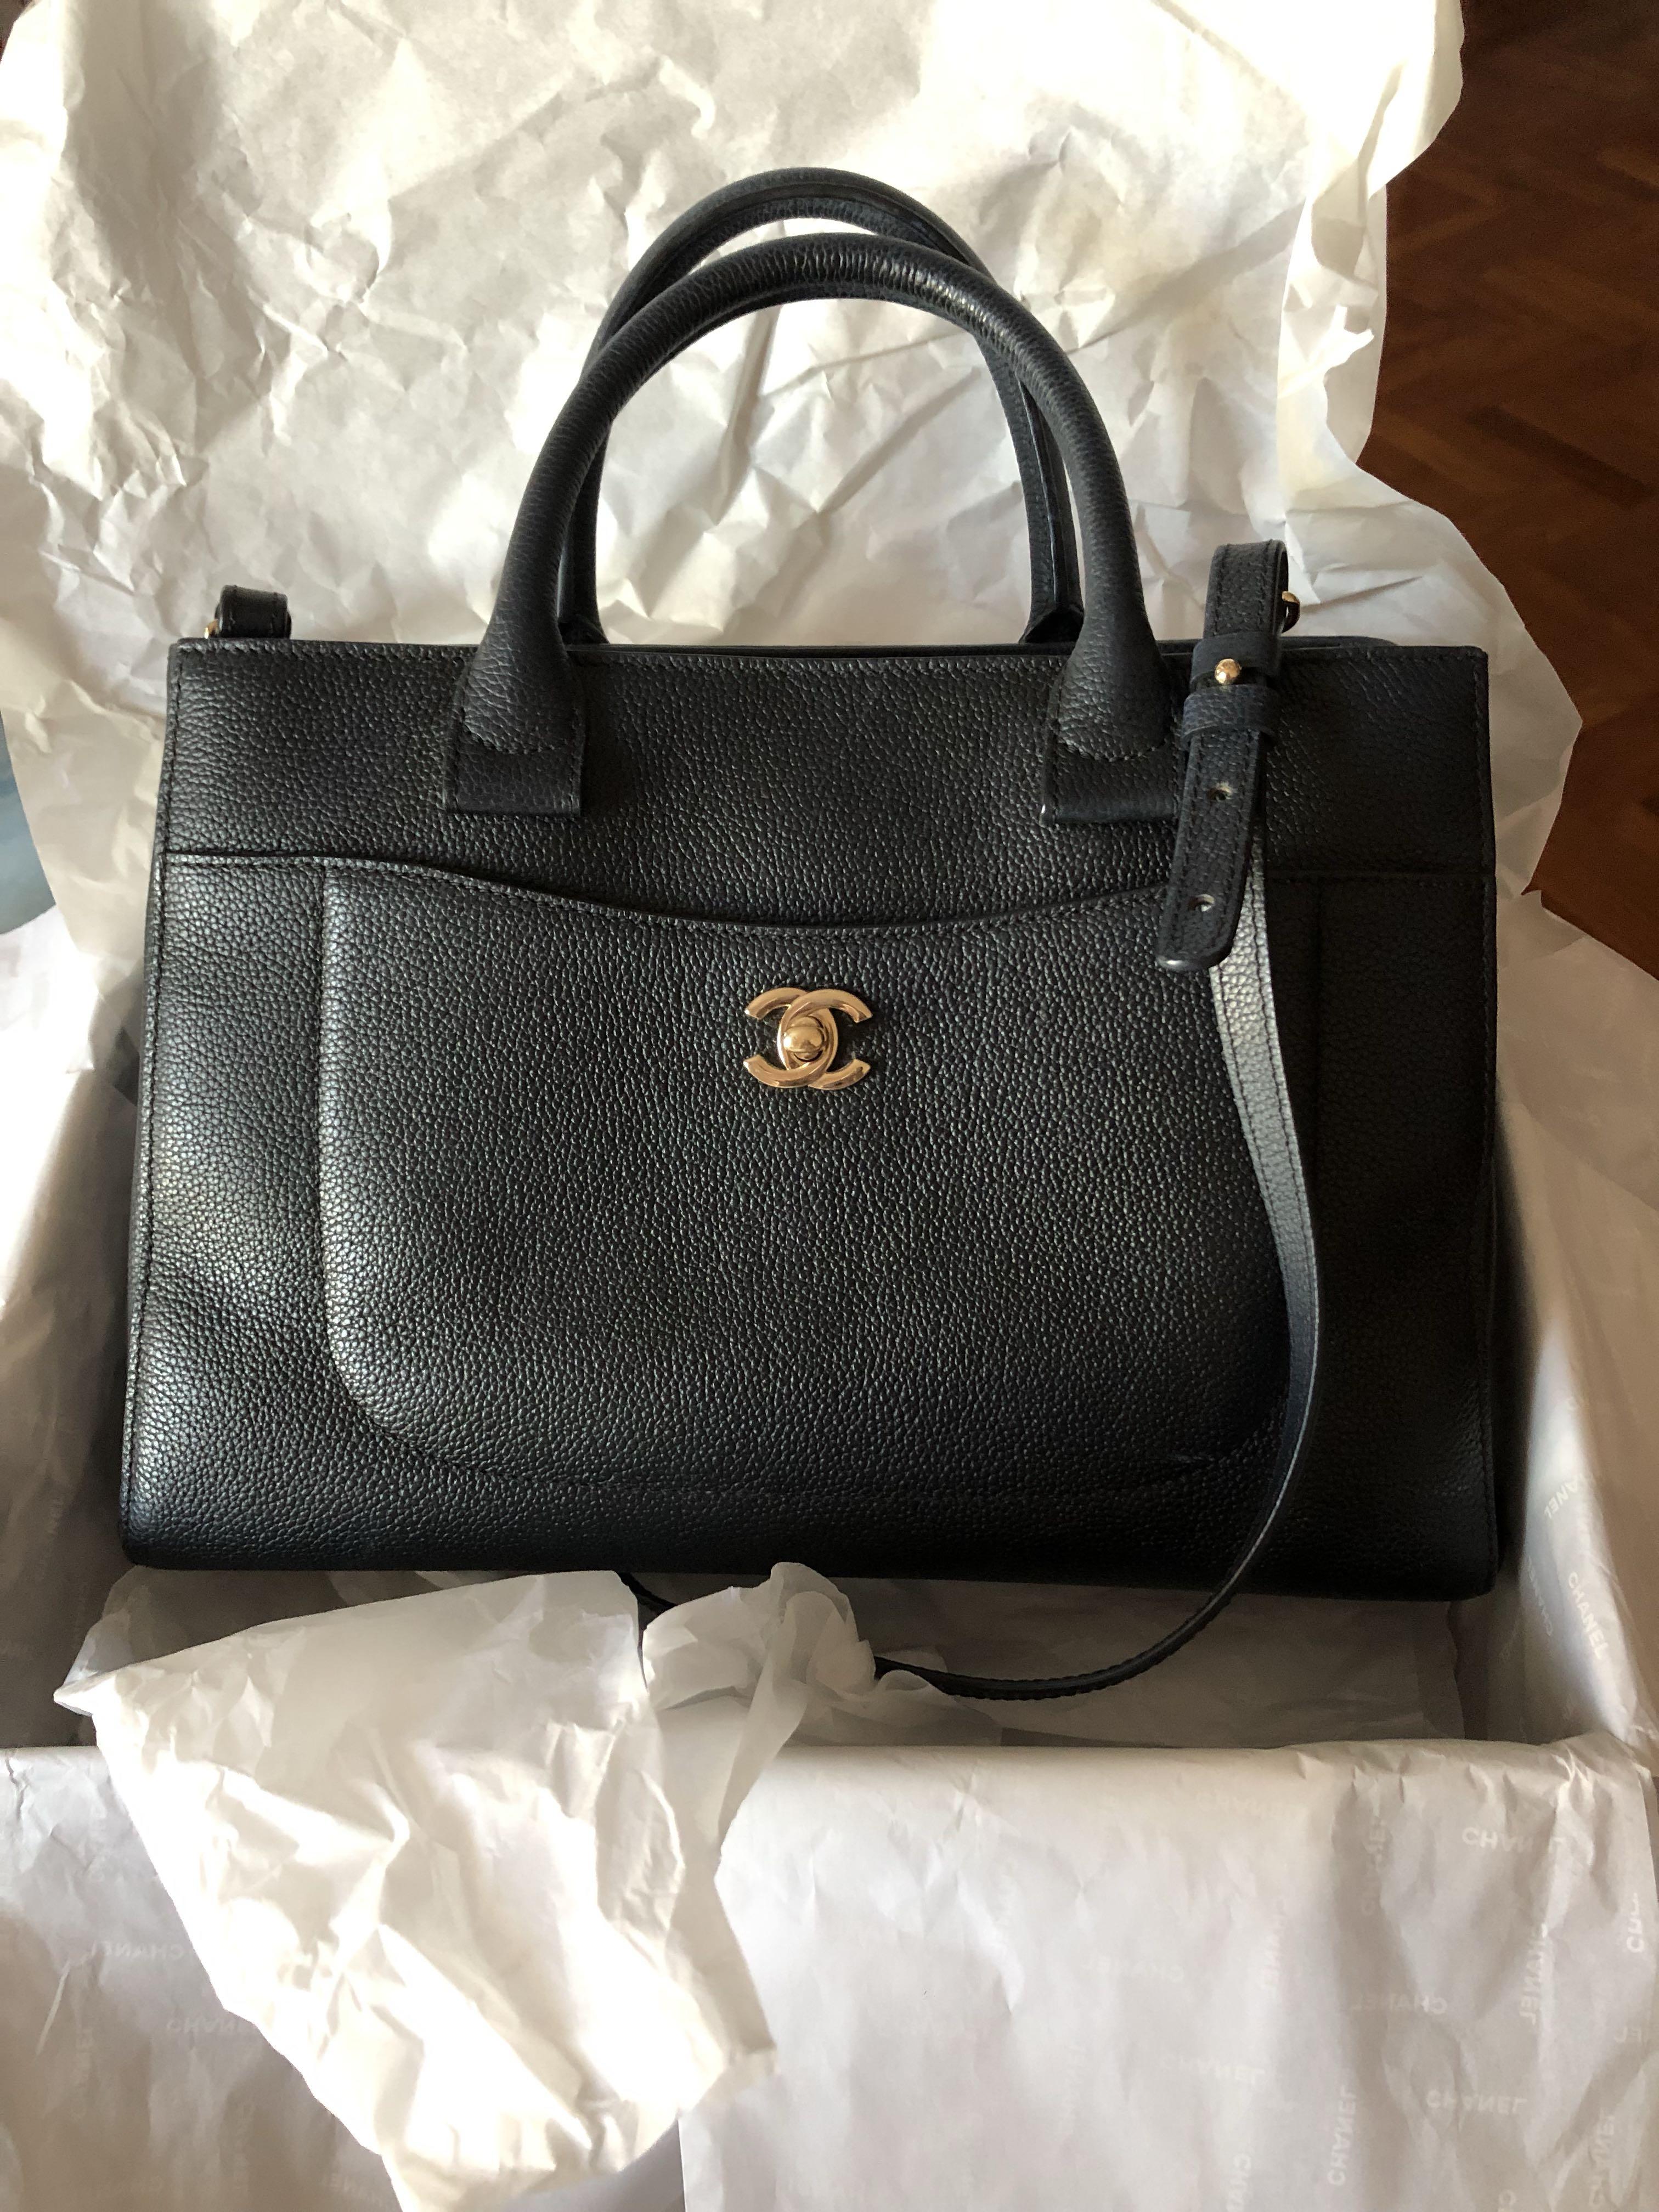 Bag Review: What Fits in a Chanel Medallion Bag - Lollipuff